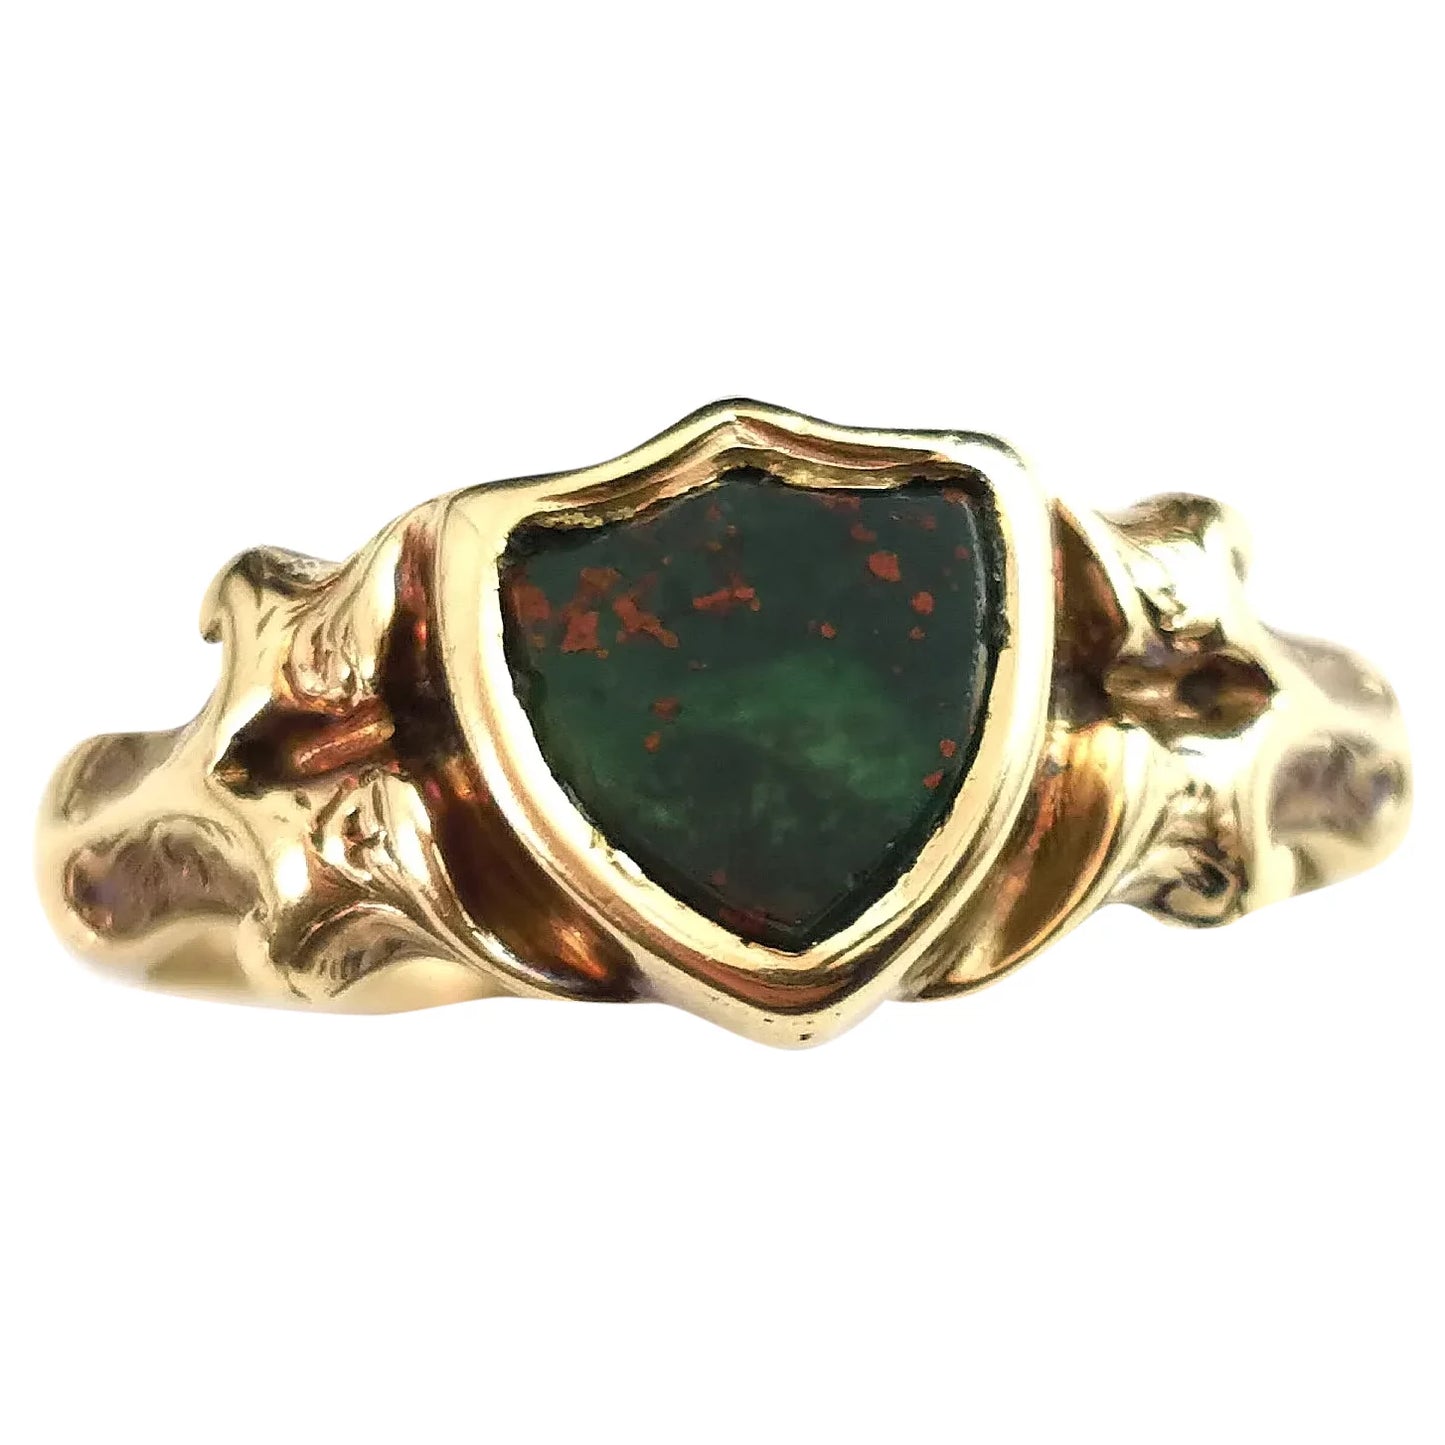 Antique 12ct gold Bloodstone signet ring, Shield shaped, Pinky ring